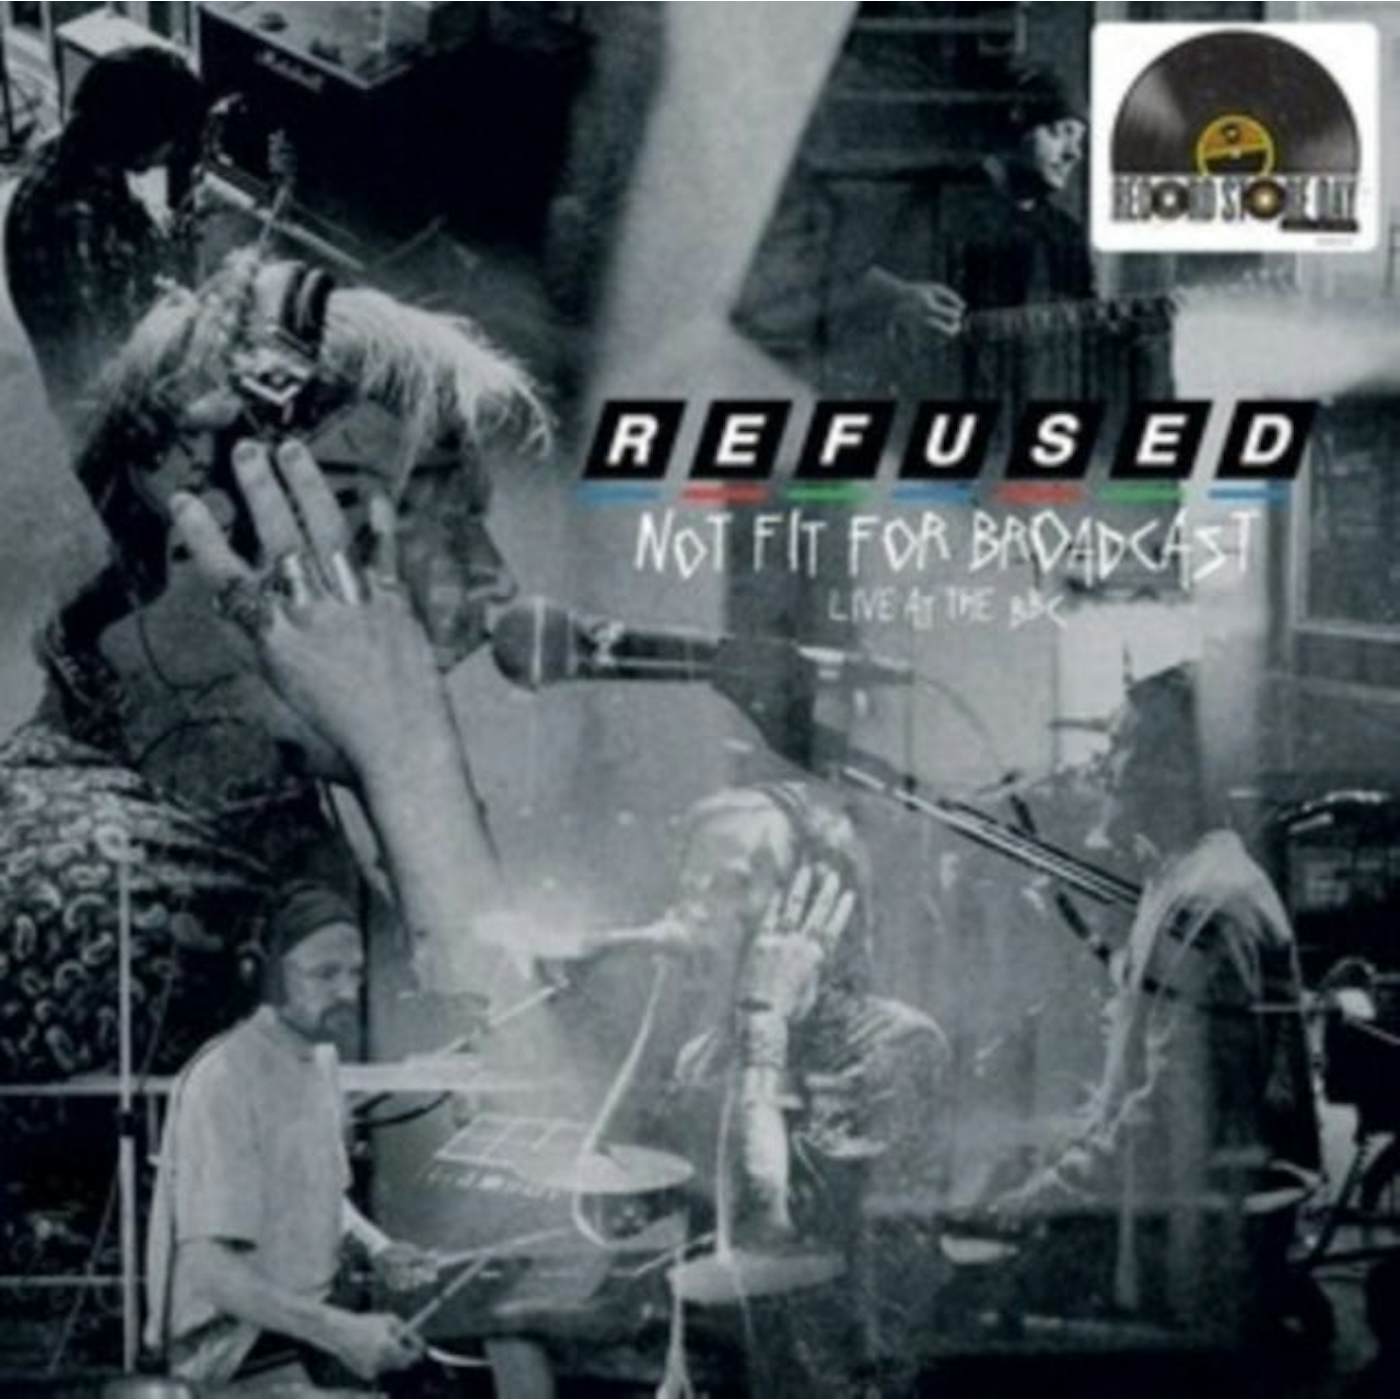 Refused LP Vinyl Record - Not Fit For Broadcasting - Live At The BBC (Crystal Clear Vinyl) (RSD 20. 20. )